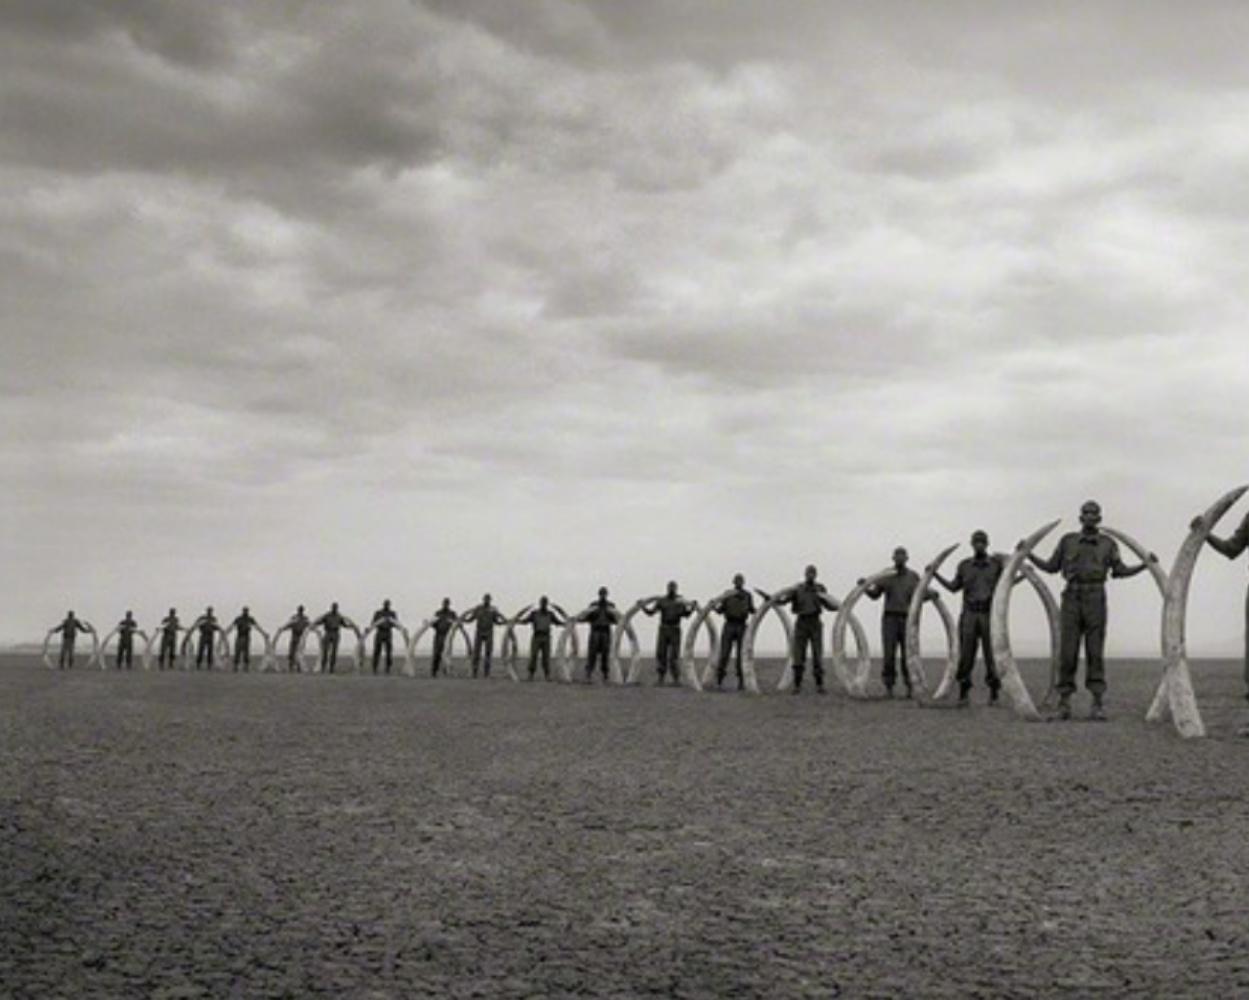 Rangers (Line Of) With Tusks Of Killed – Nick Brandt, Africa, Animal, Elephant 3